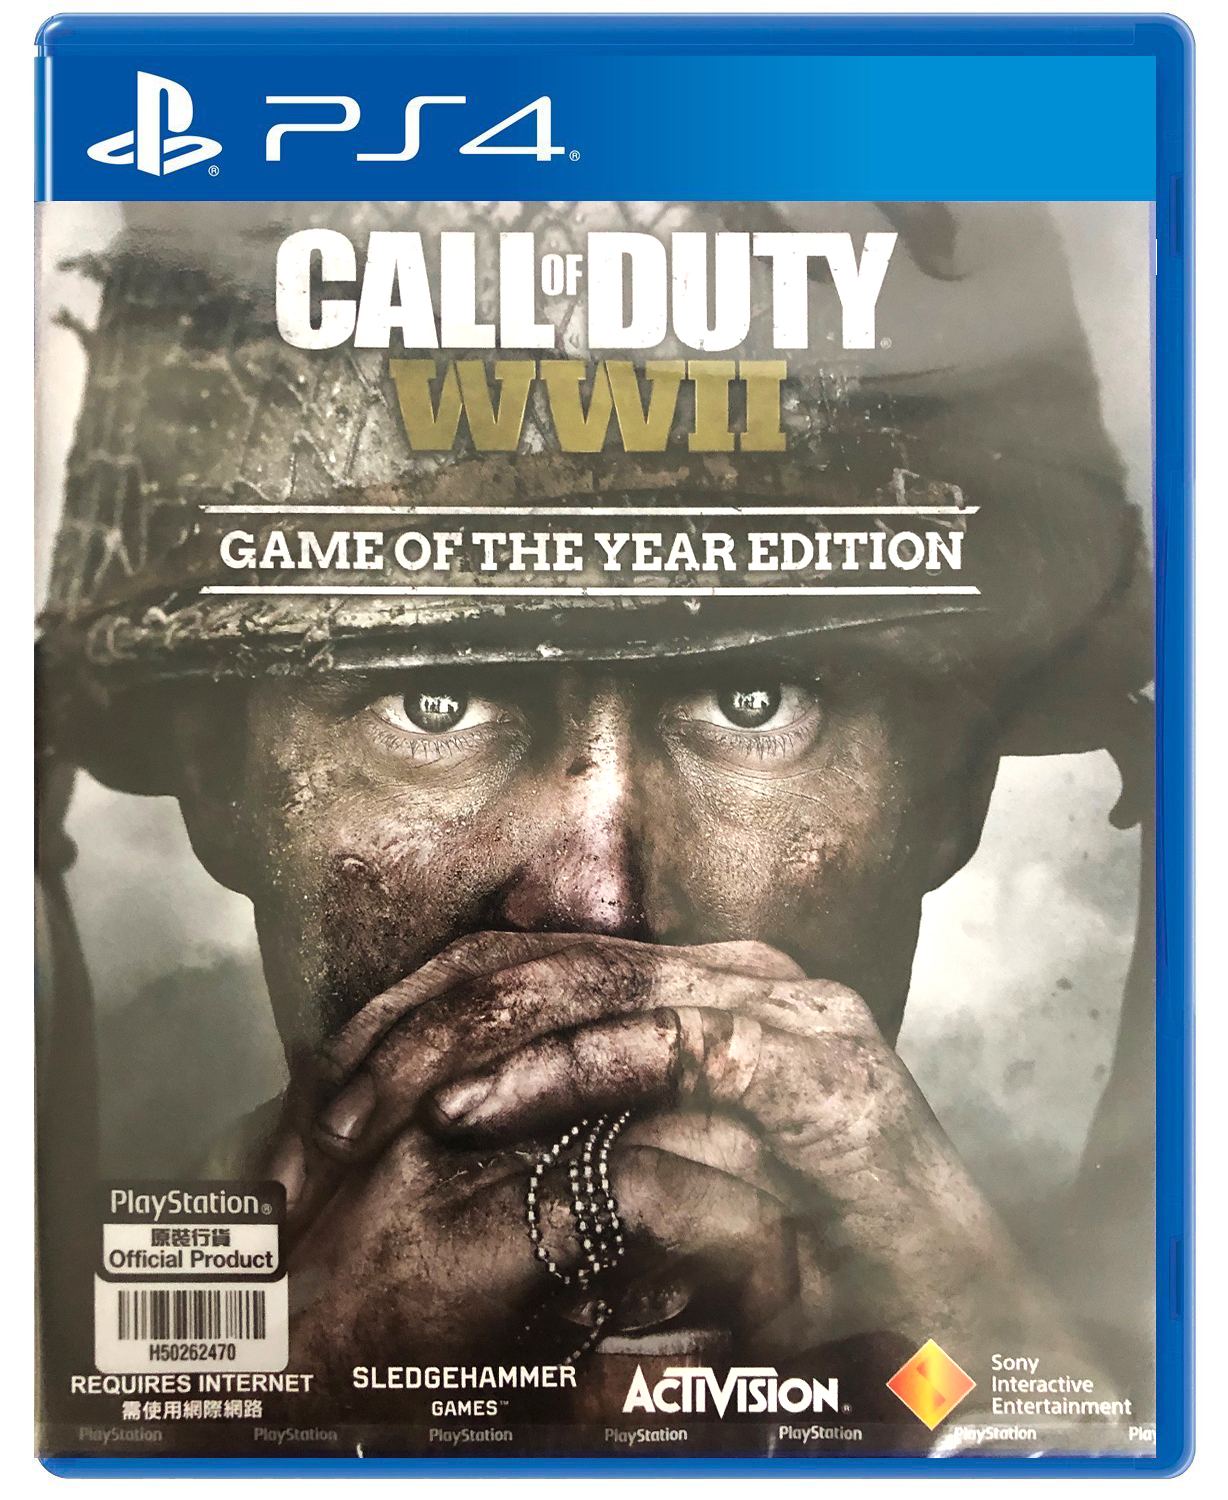 Buy Call of Duty®: WWII - Gold Edition